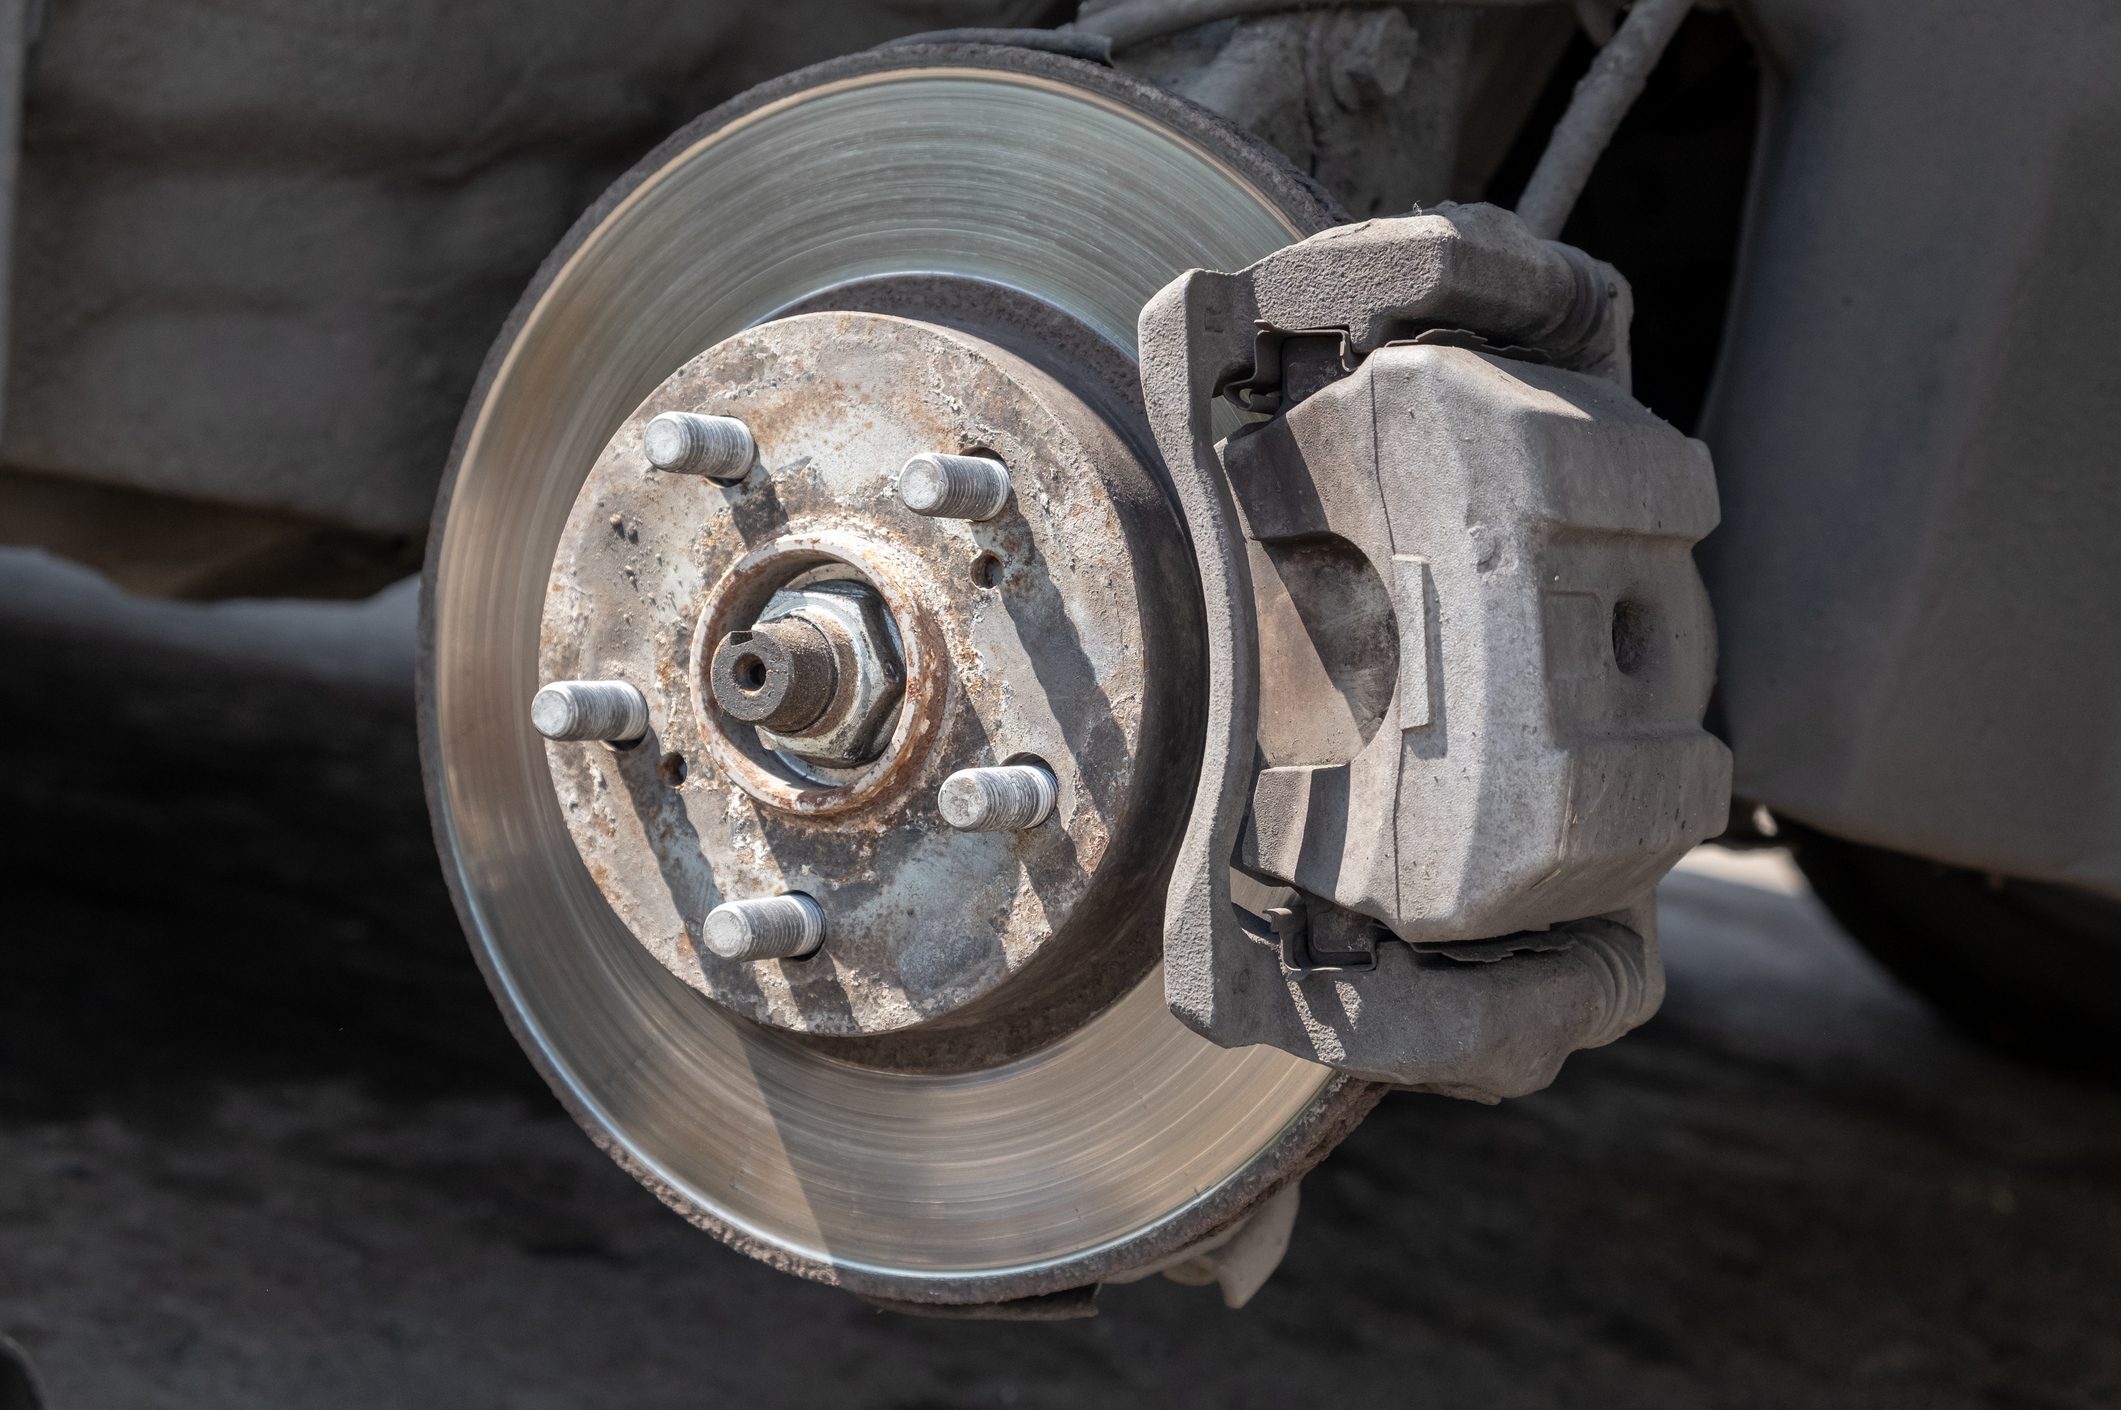 Disc brake of the vehicle for repair, in process of tire replacement